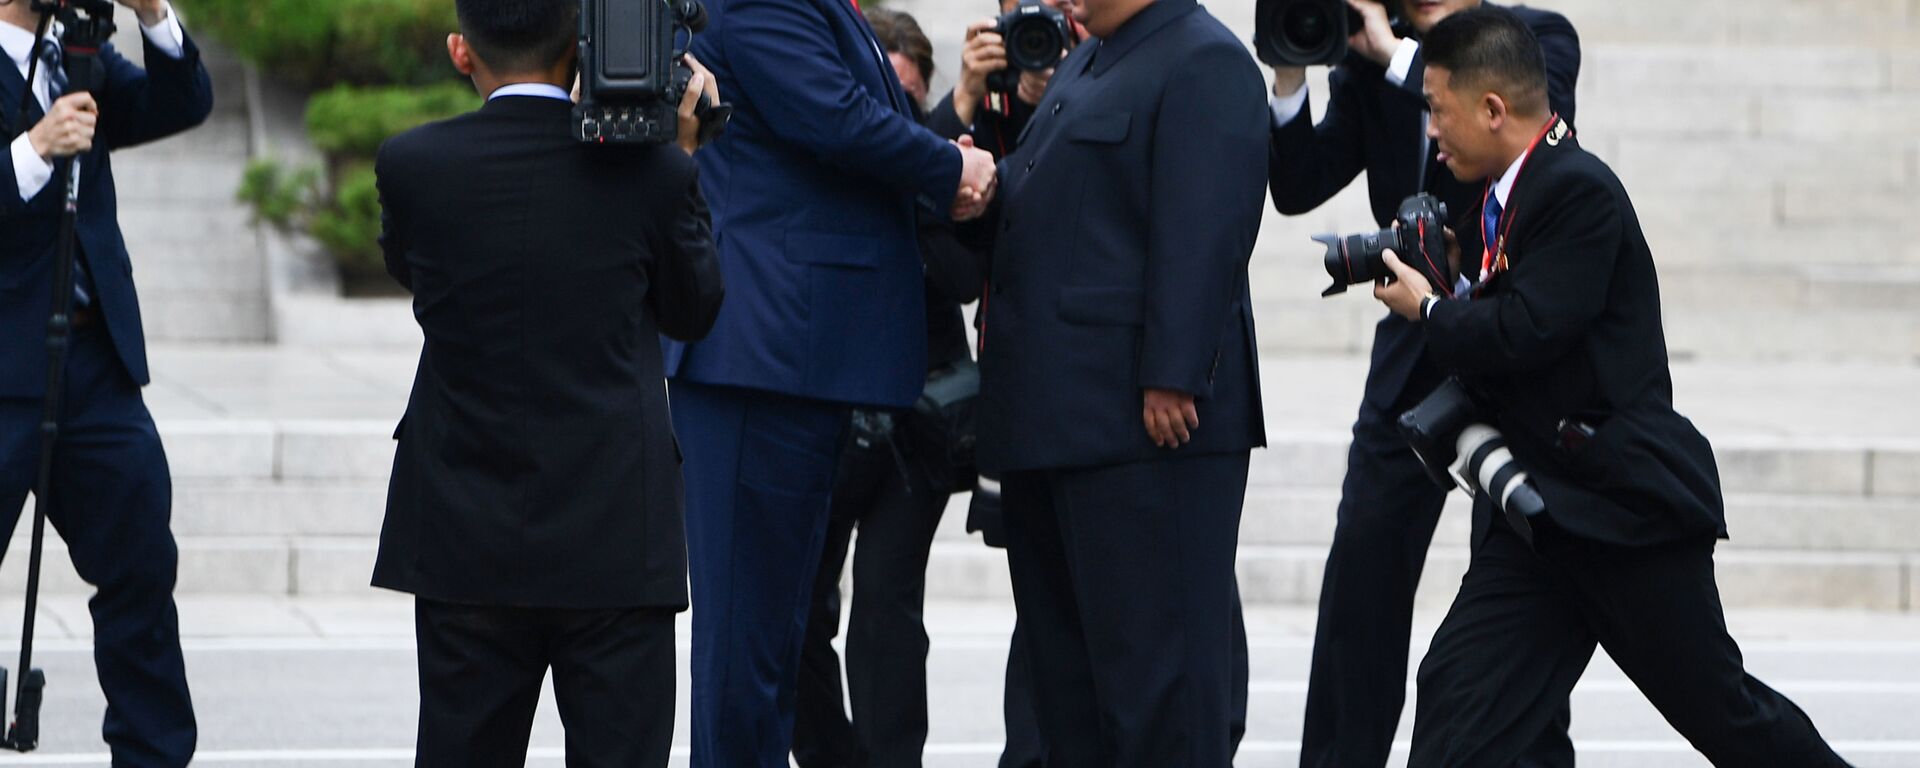 North Korea's leader Kim Jong Un shakes hands with US President Donald Trump north of the Military Demarcation Line that divides North and South Korea, in the Joint Security Area (JSA) of Panmunjom in the Demilitarized zone (DMZ) on June 30, 2019.  - Sputnik International, 1920, 30.06.2019